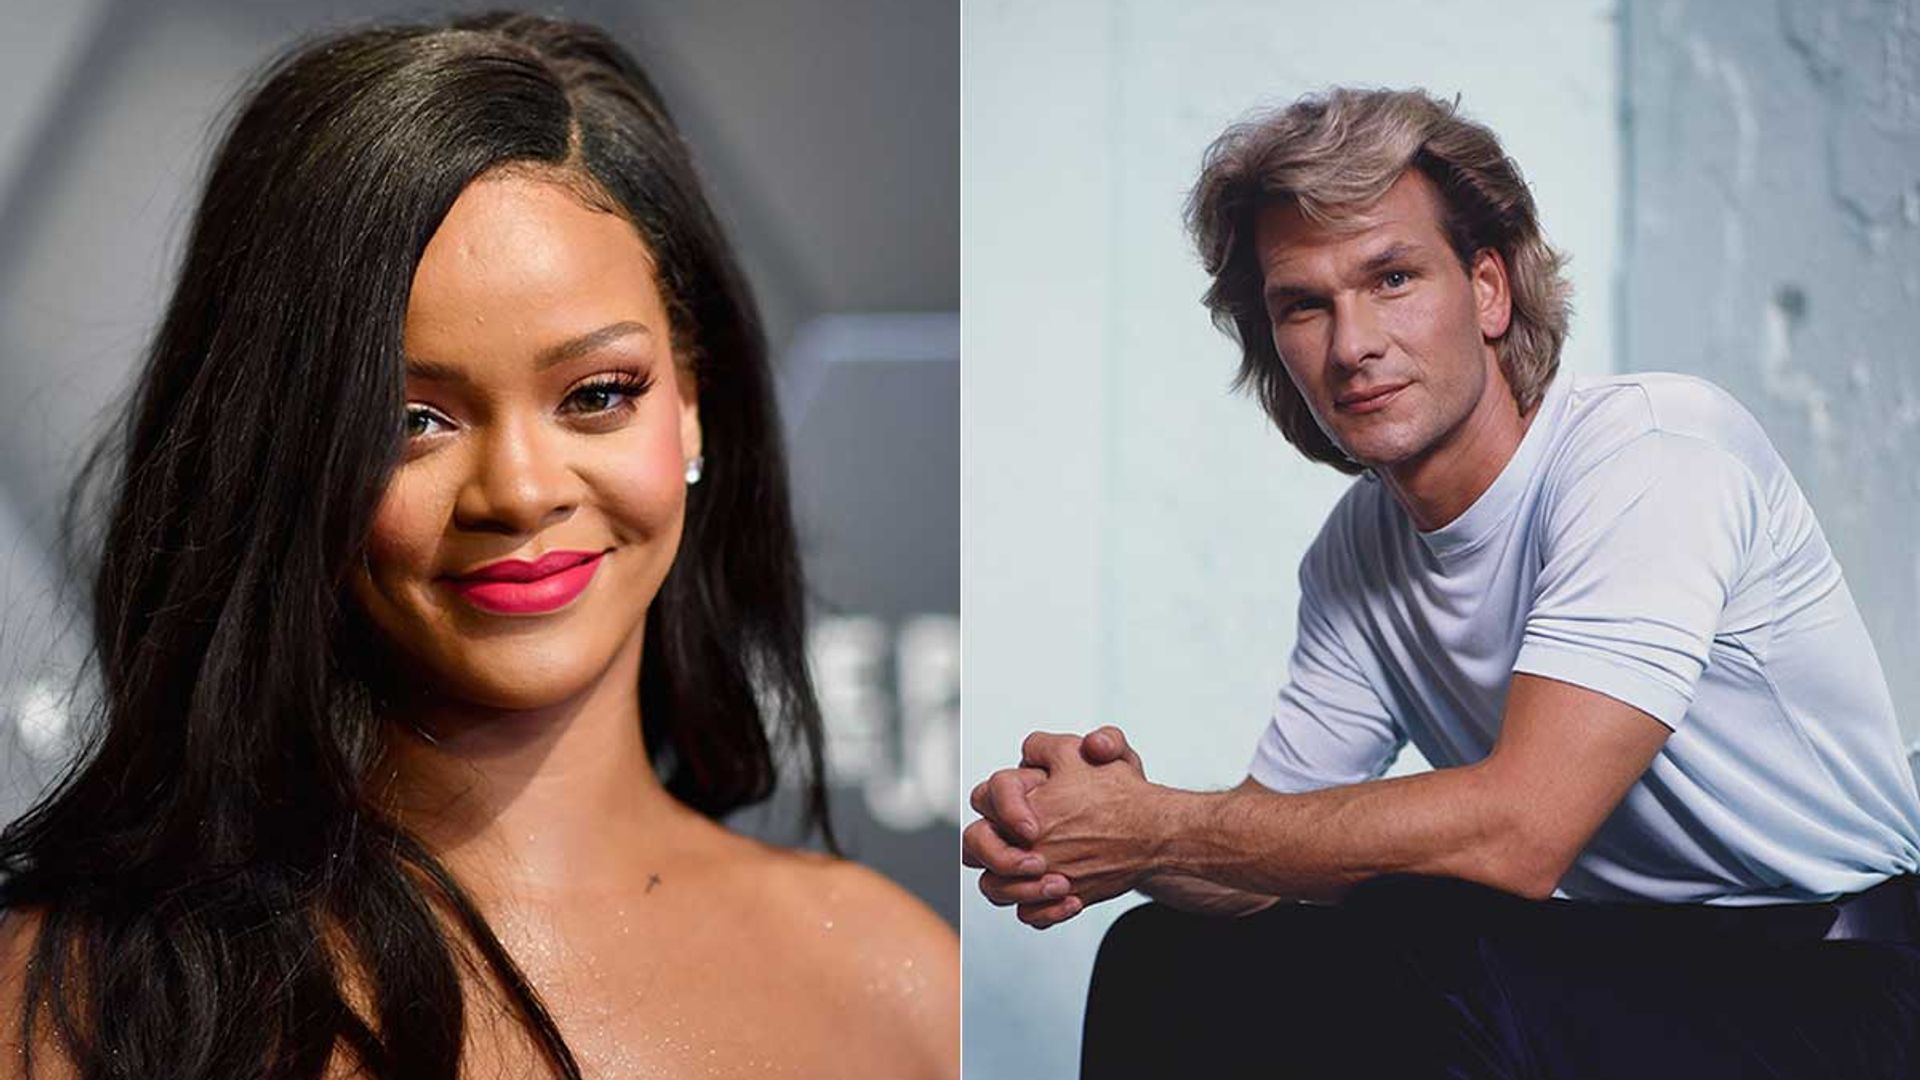 Patrick Swayze to Rihanna:15 kindest celebrities in showbiz and their secret acts of kindness revealed